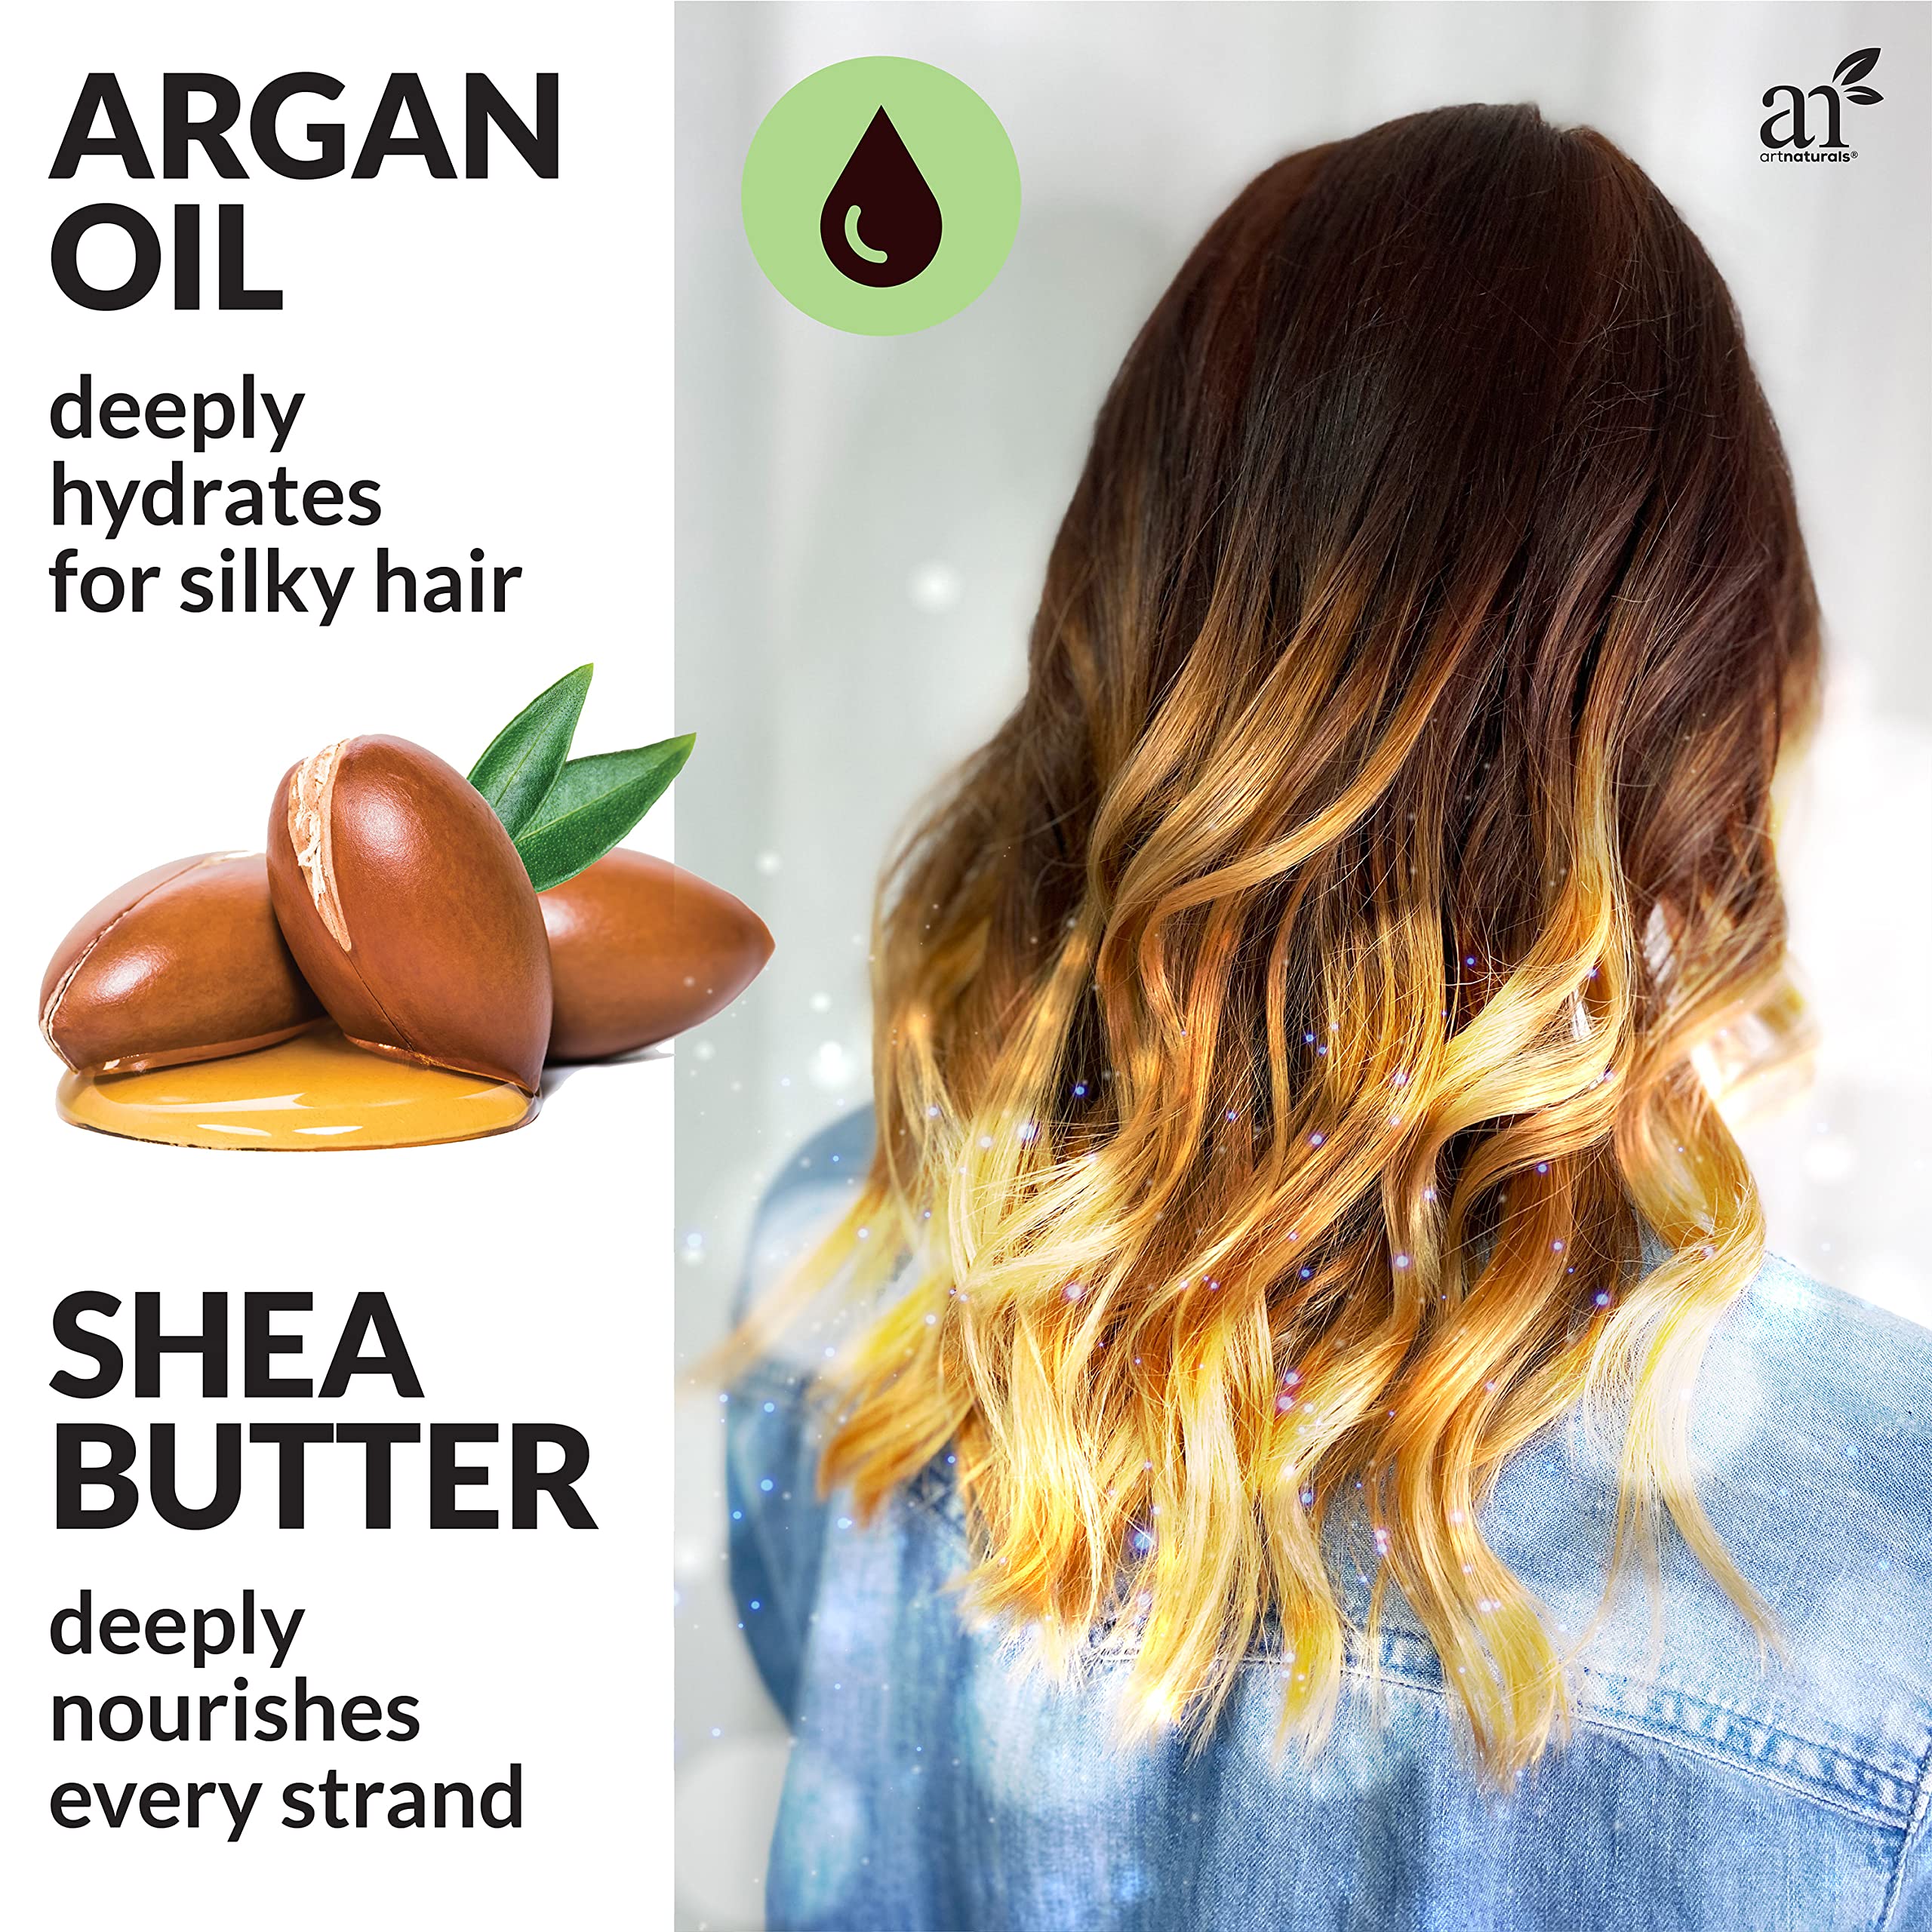 Artnaturals Argan Oil Leave-In Conditioner - (12 Fl Oz / 355ml) - Made with Organic and Natural Ingredients - for All Hair Types – Treatment for Damaged, Dry, Color Treated and Hair Loss (ANHA-0802)